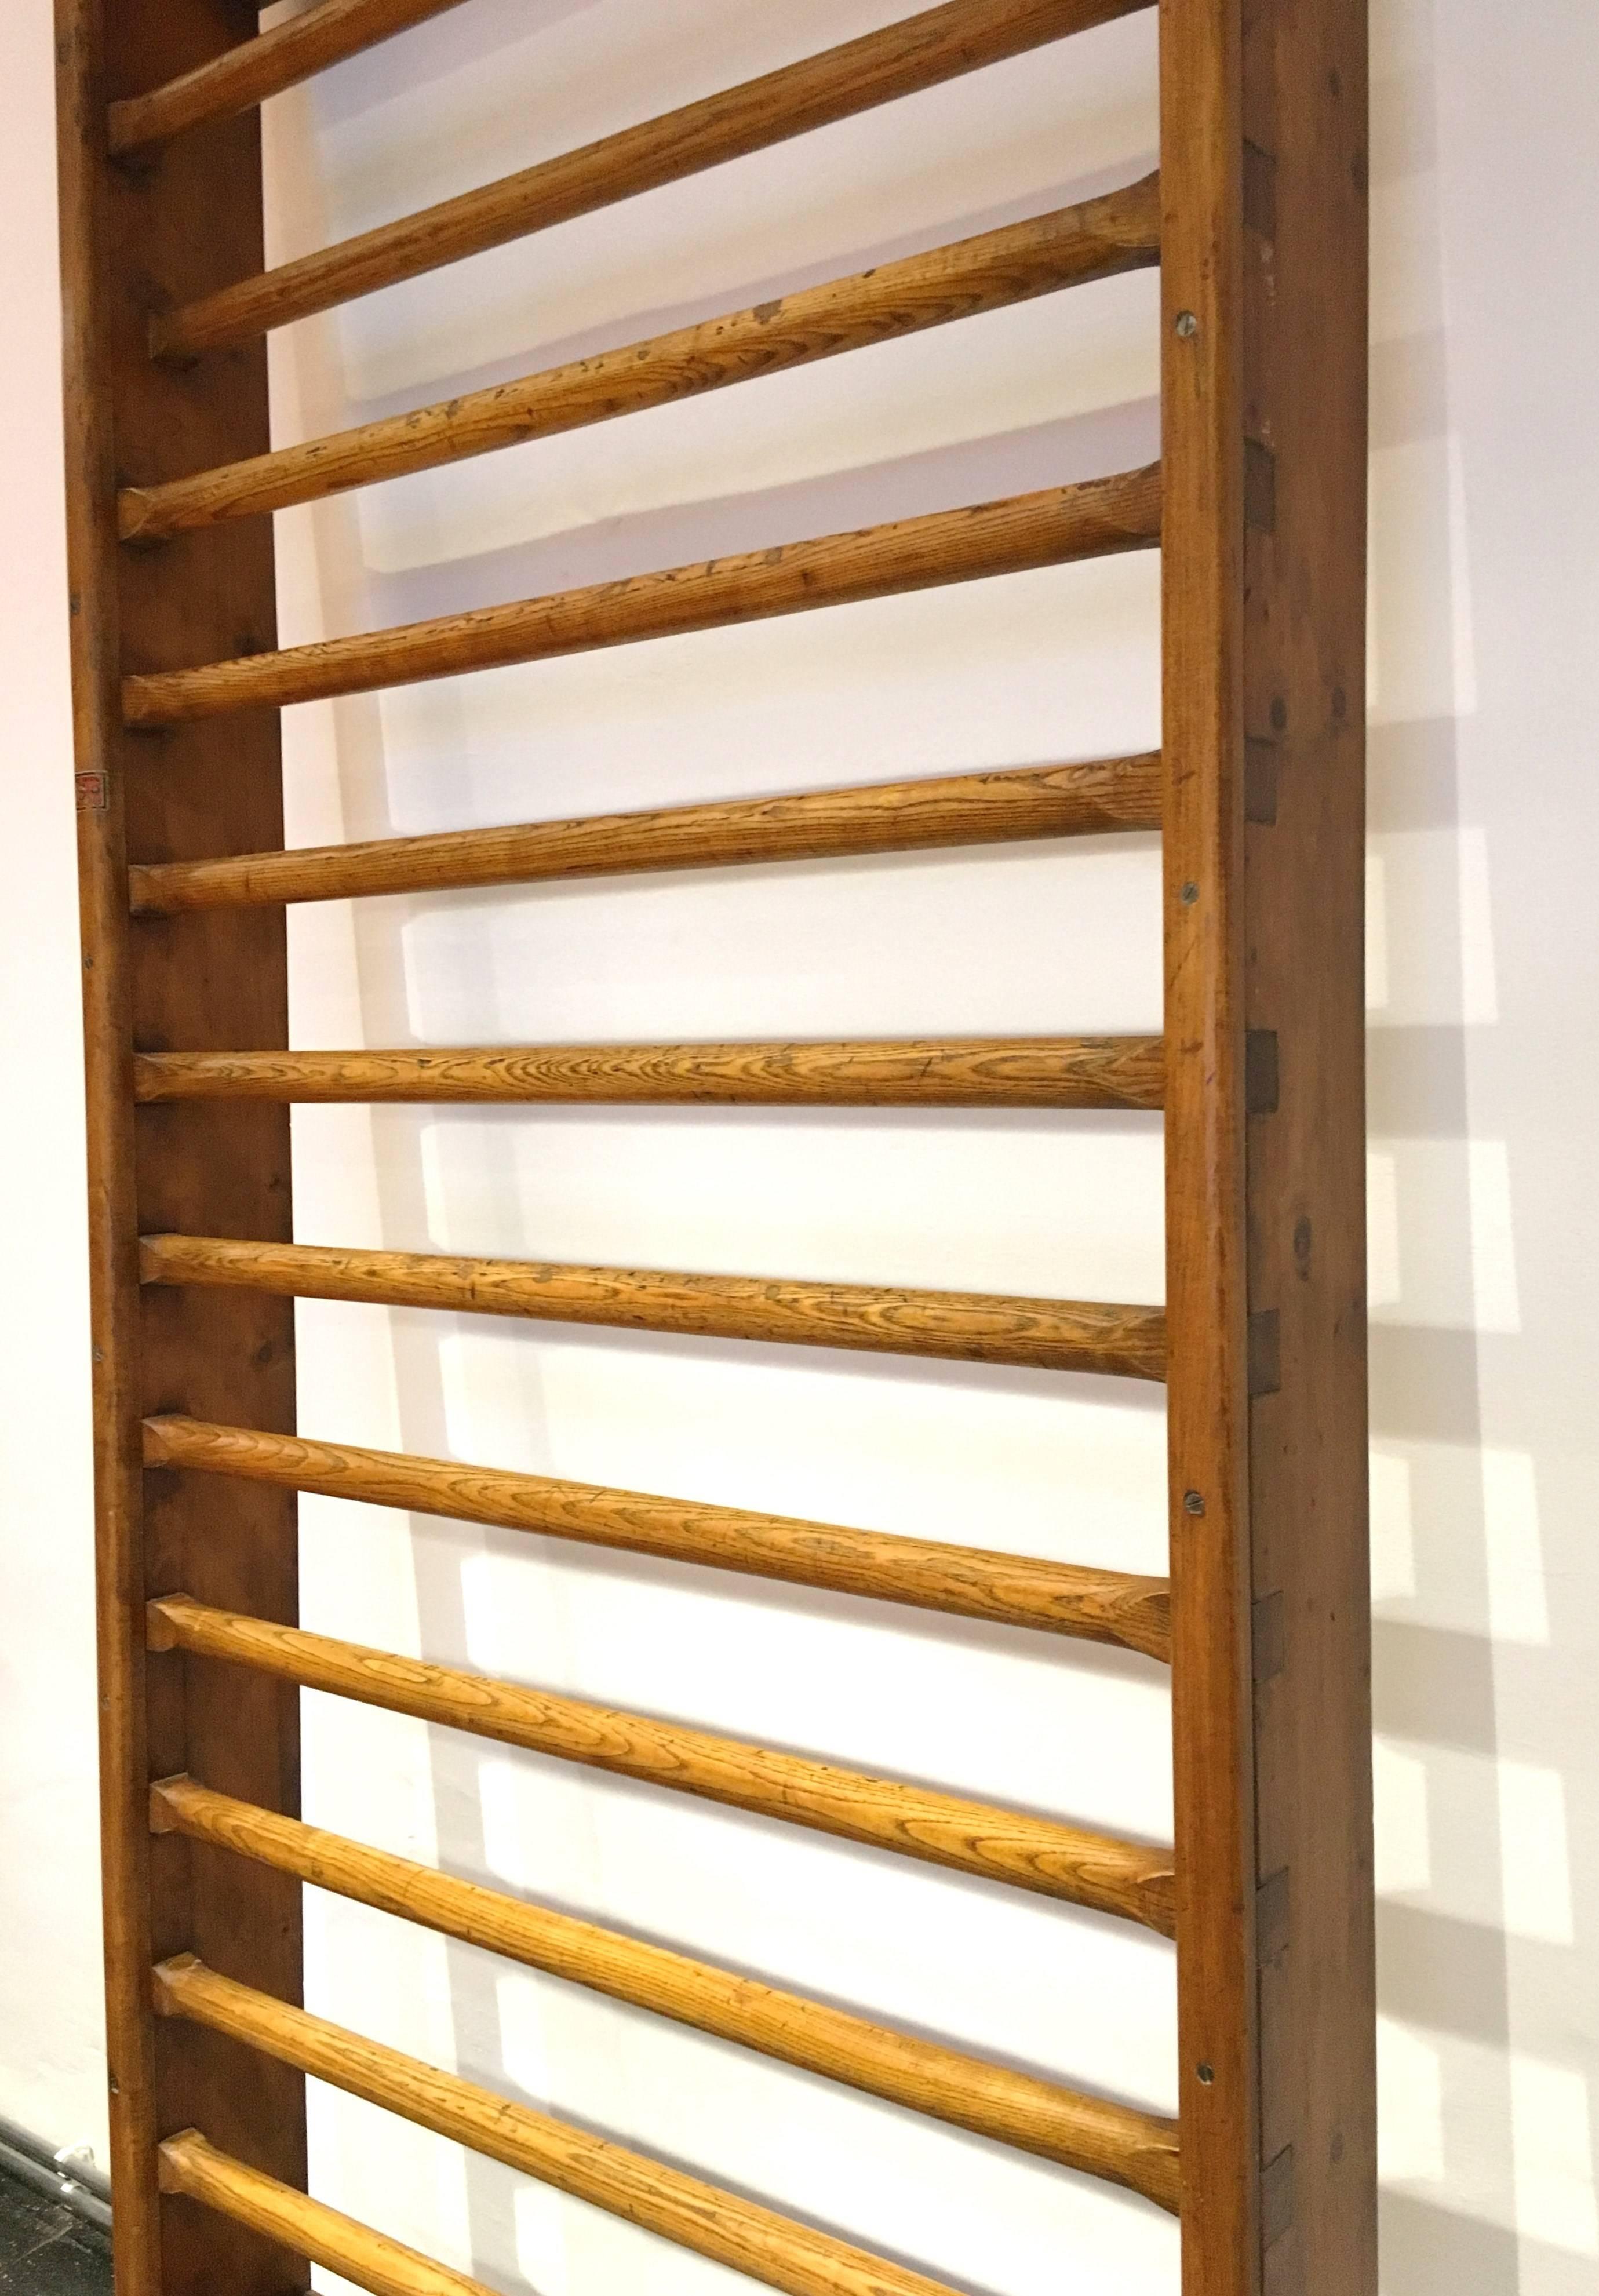 This wooden rack originates from a gym in former Czechoslovakia and has been completely restored; however the wood still shows a vintage patina.
It can be used for a daily workout, as clothes Stand or towel holder.

We offer Shop to Door delivery